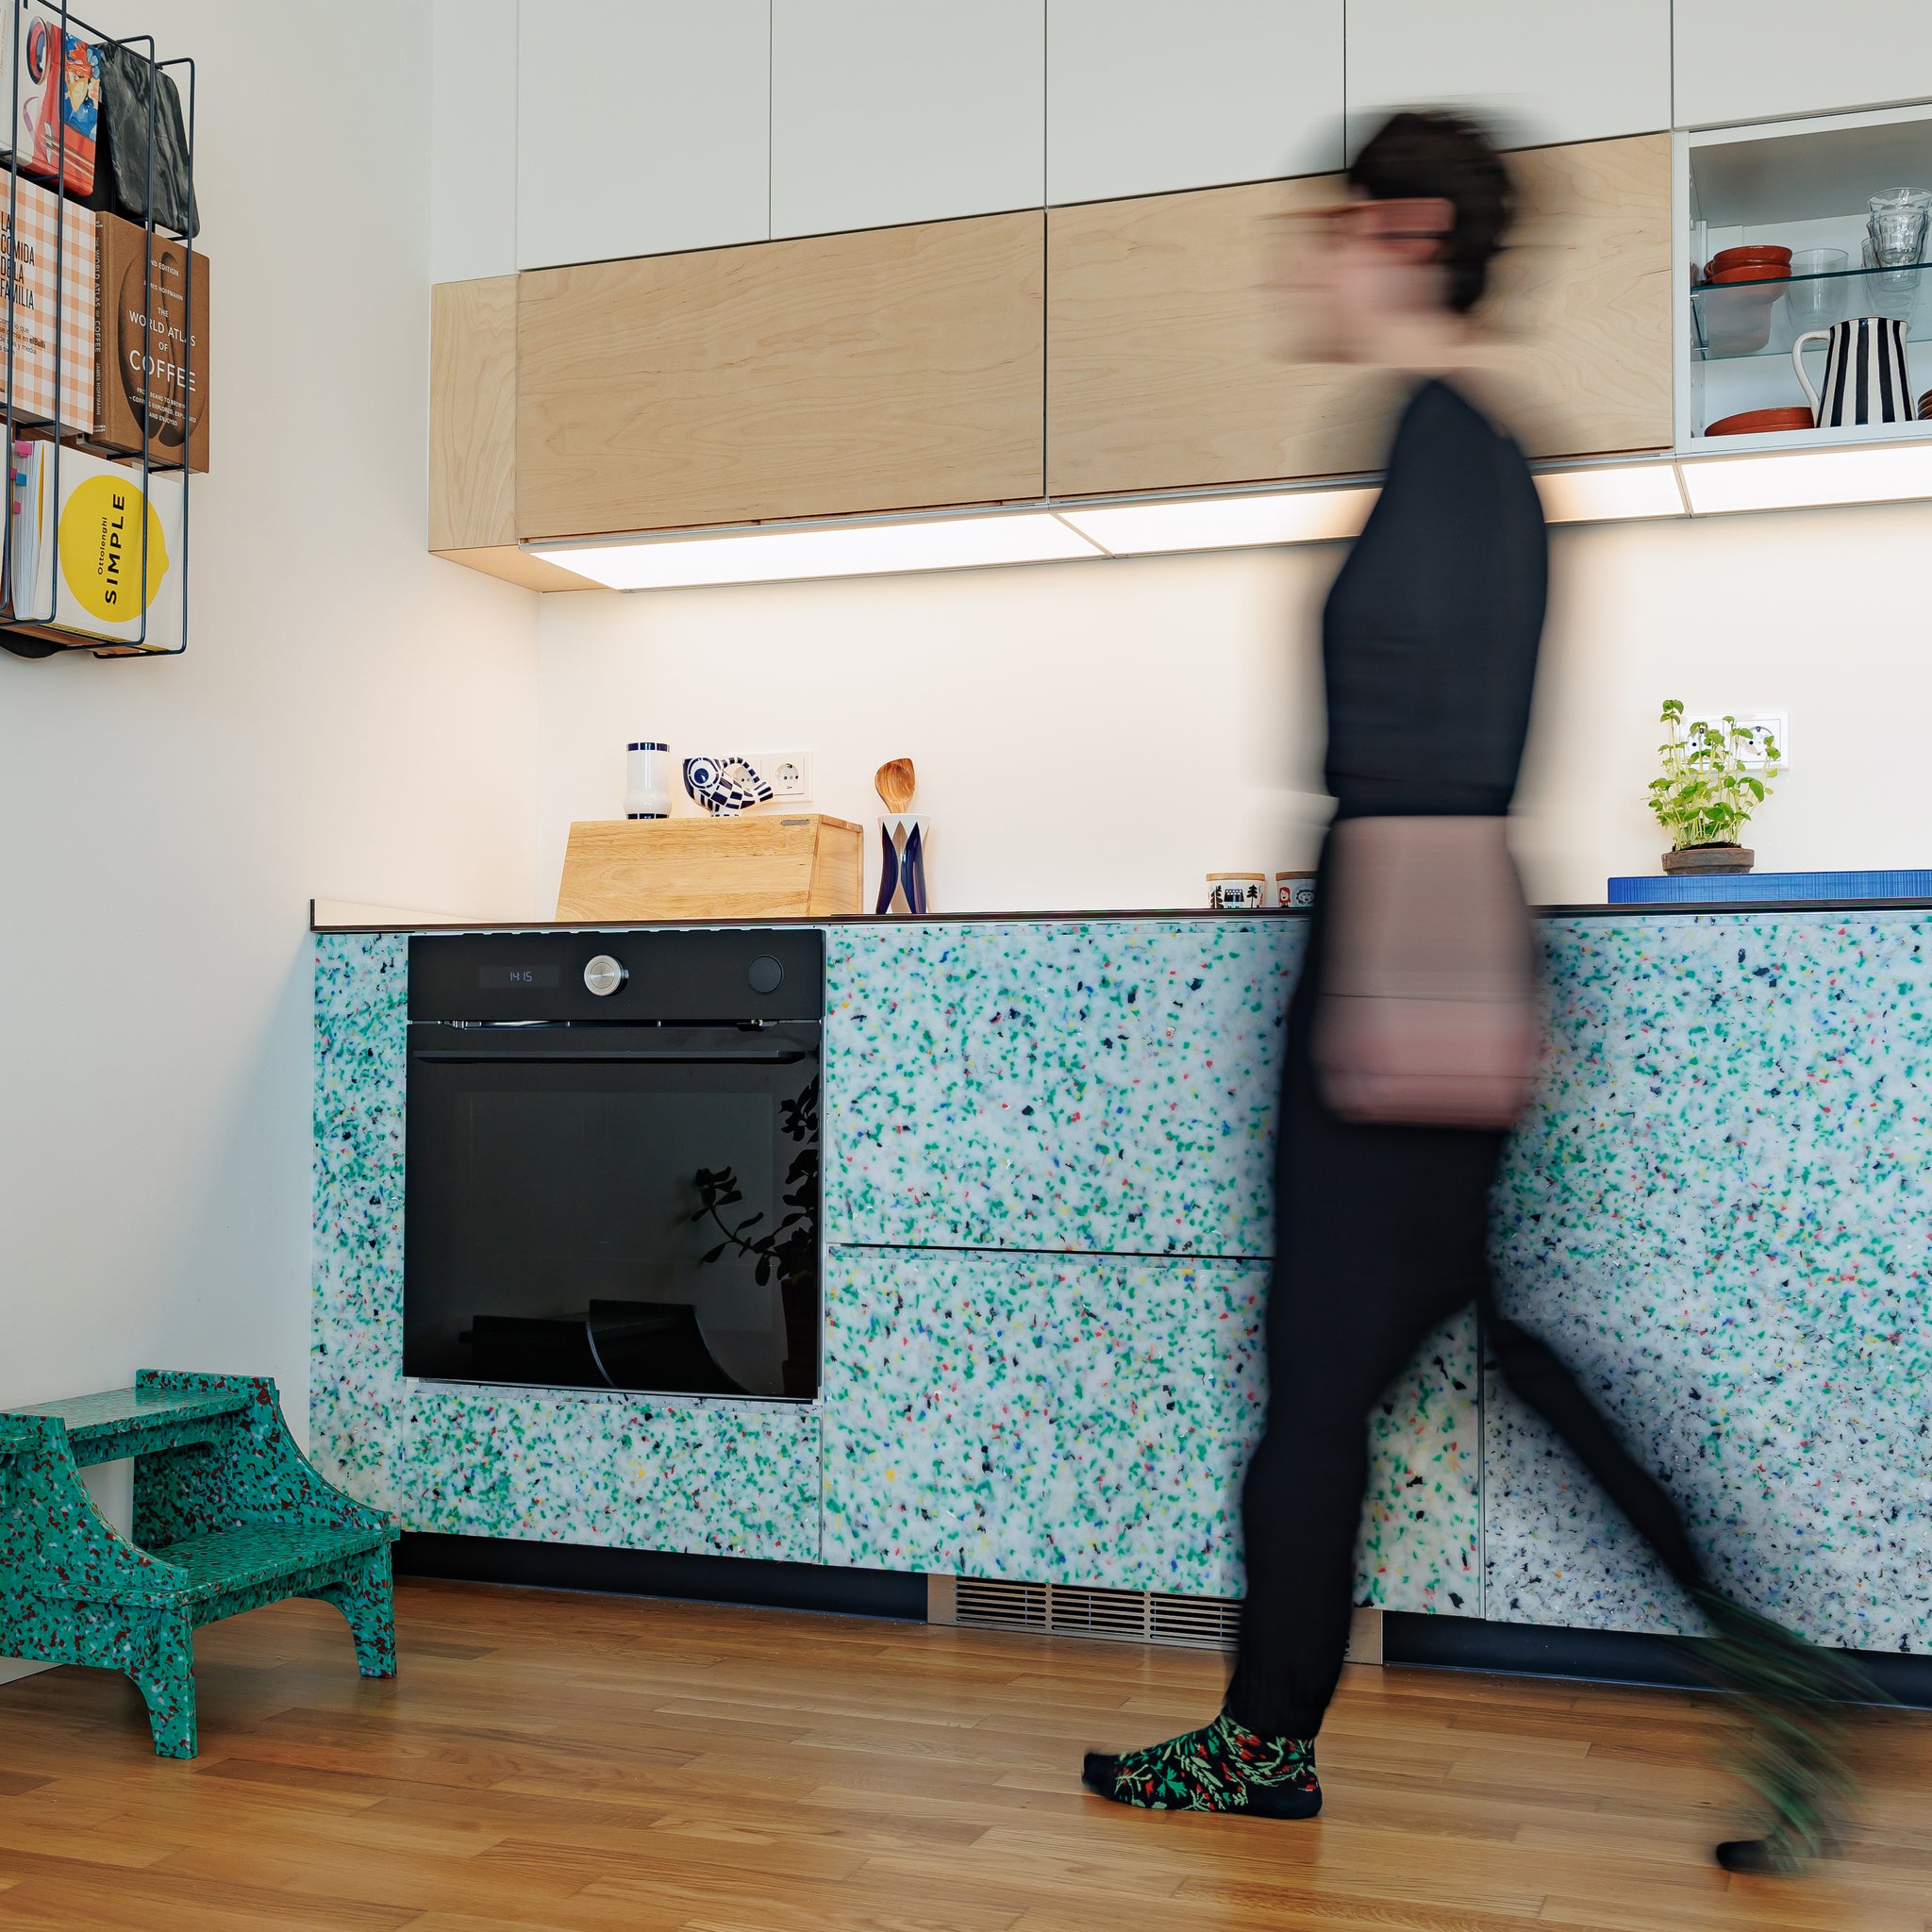 COSTUM FRONTS FOR IKEA KITCHEN BY THE MINIMONO PROJECT - BRAND FOR ECO FRIENDLY - PLAYFUL - MULTI FUNCTIONAL - SUSTAINABLE - HIGH QUALITY - DESIGN FURNITURE FROM RECYCLED PLASTIC FOR BOTH ADULT AND CHILDREN MADE IN BERLIN GERMANY